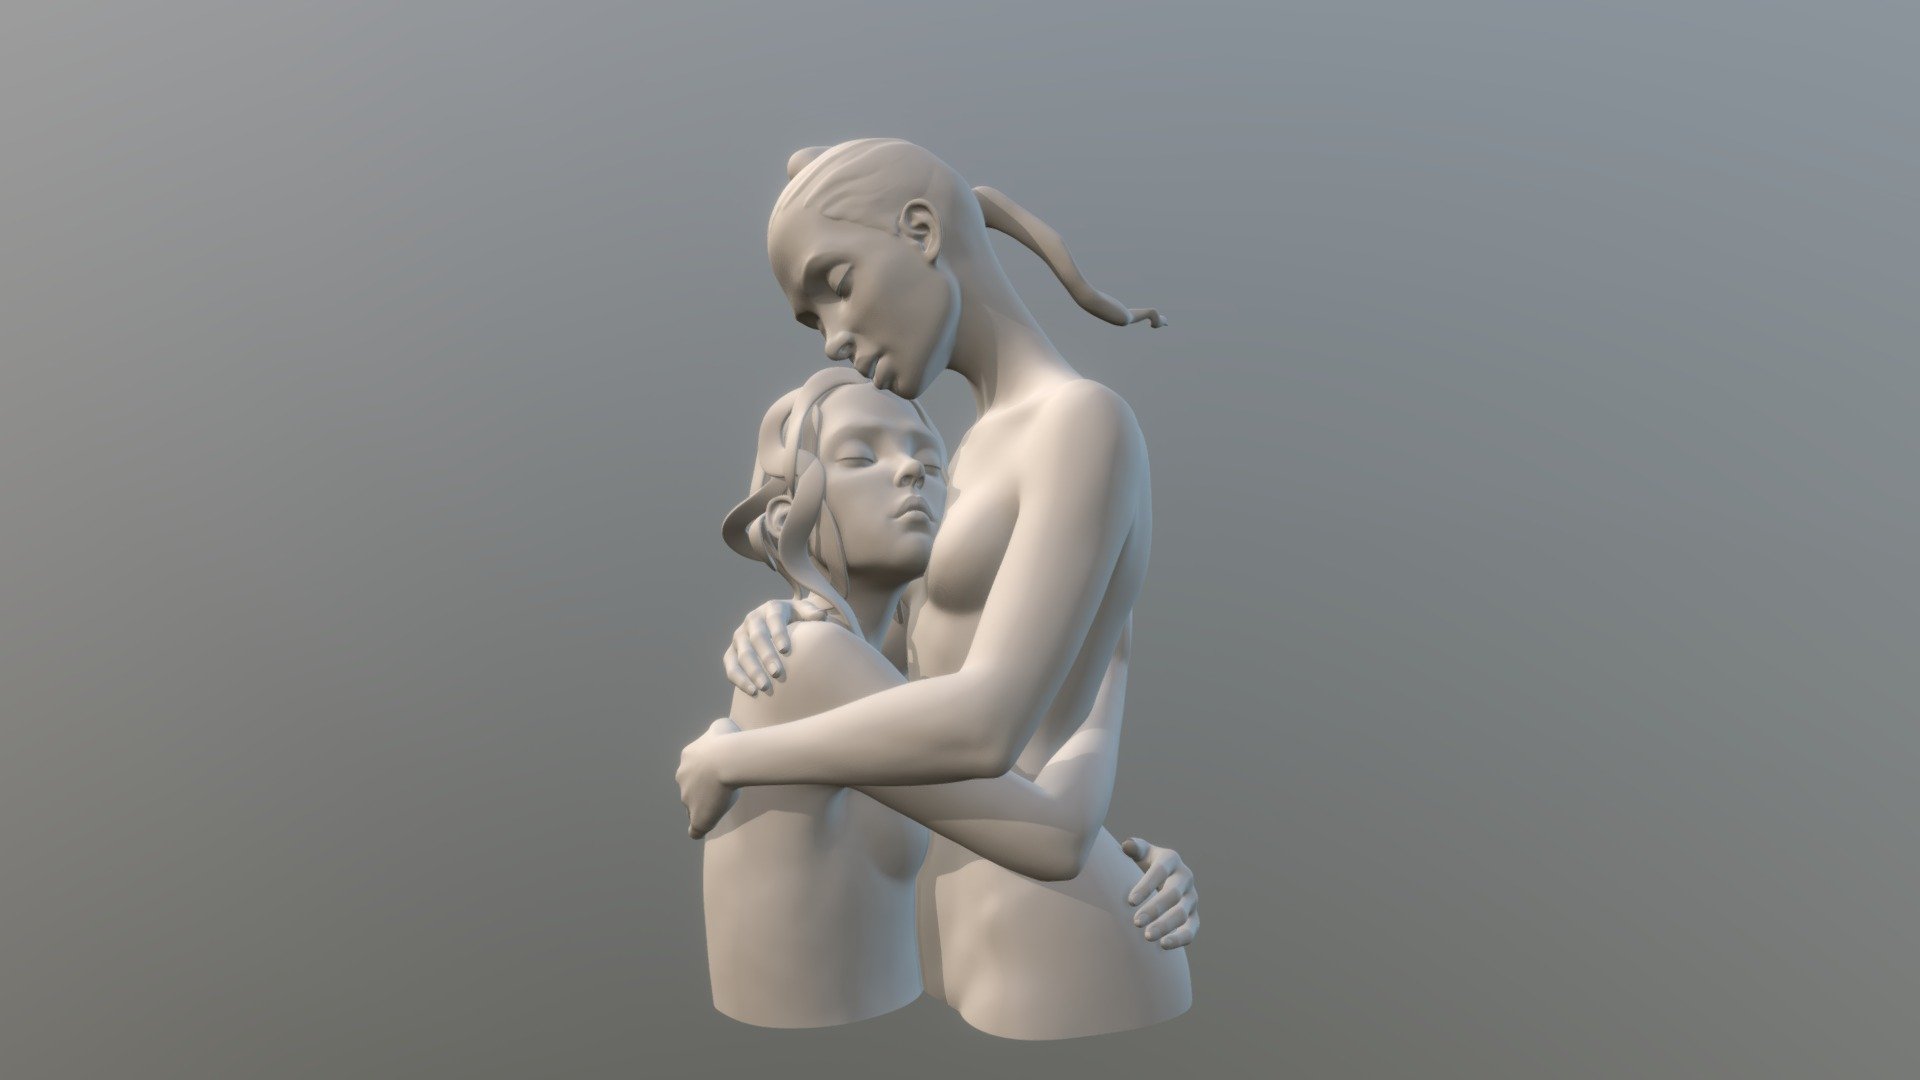 Work in Progress 20220801 for The Park - TheHug_20220801 - 3D model by PawinSculpt 3d model